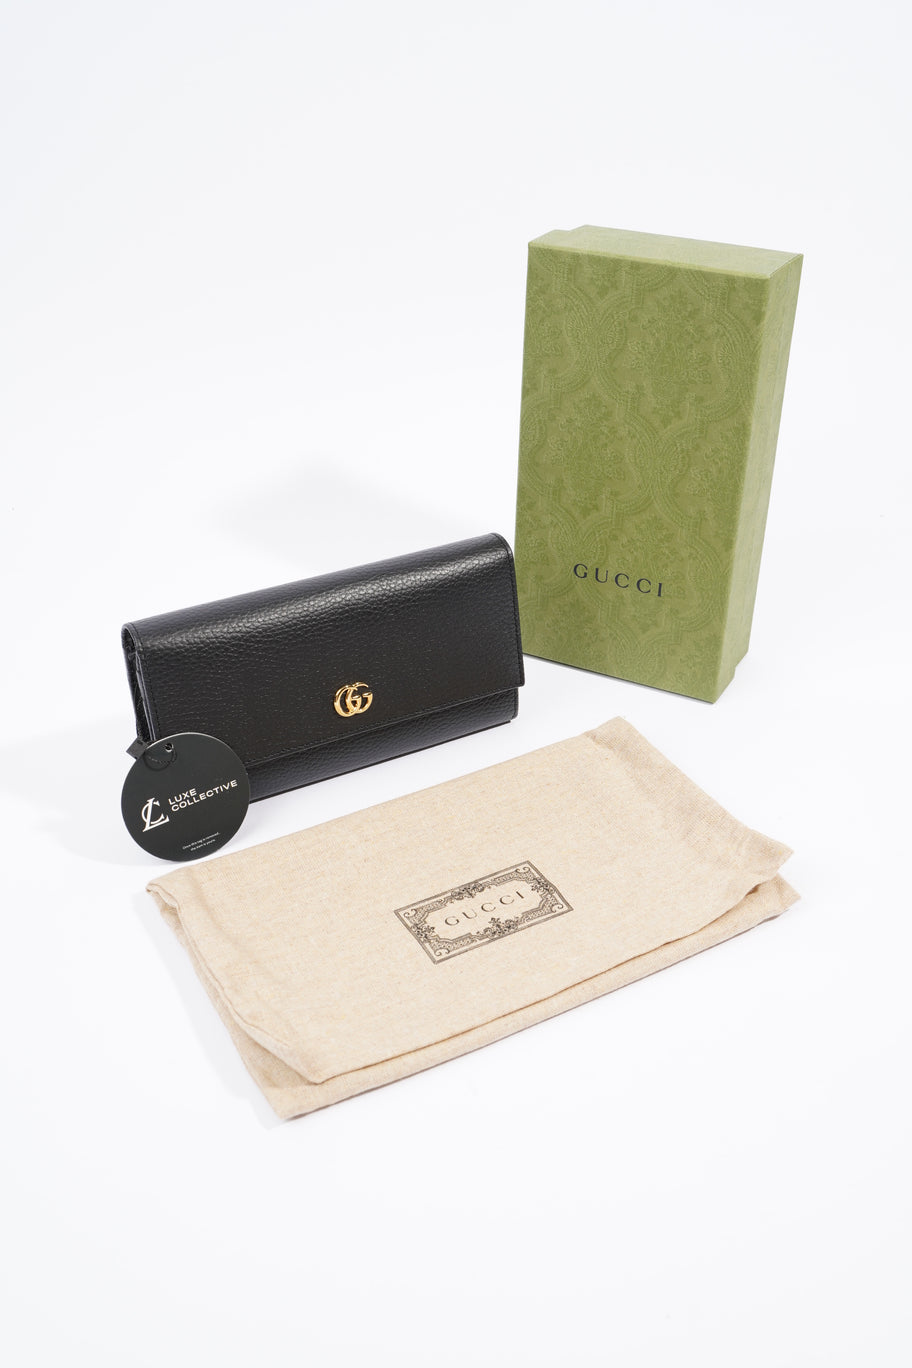 GG Marmont Long Wallet Black Calfskin Leather Image 7